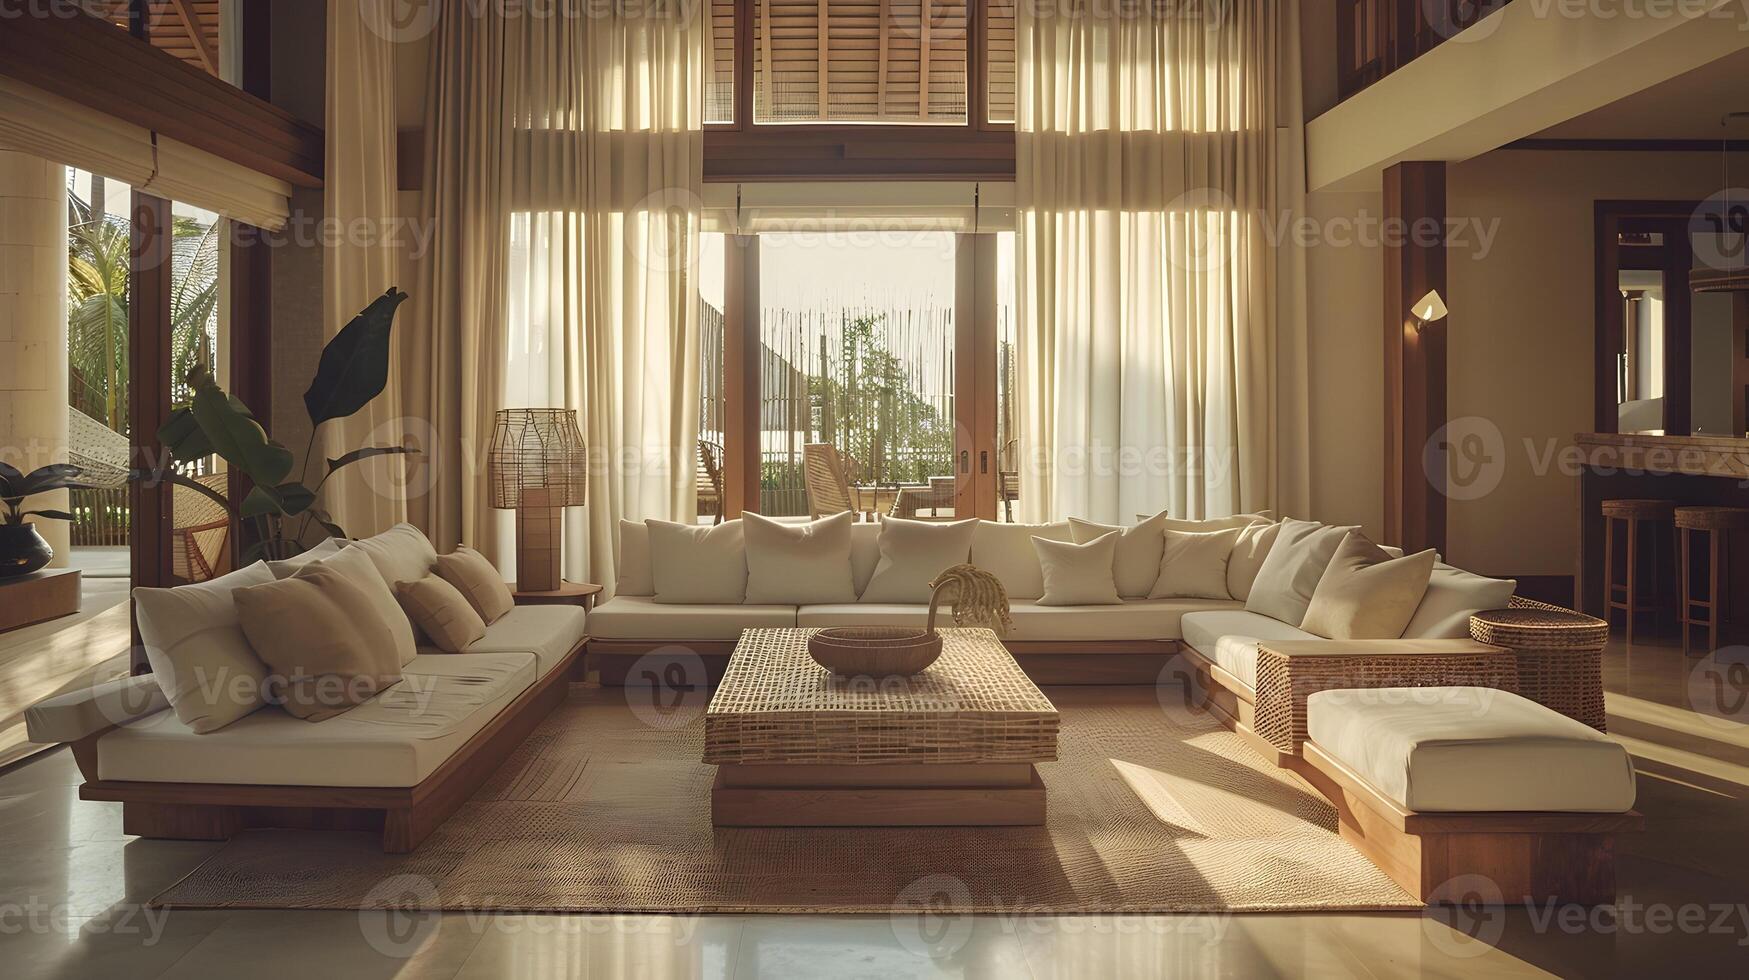 Elegant Bali Villa Living Room Basked in Warm Sunlight and Natural Wood Accents photo